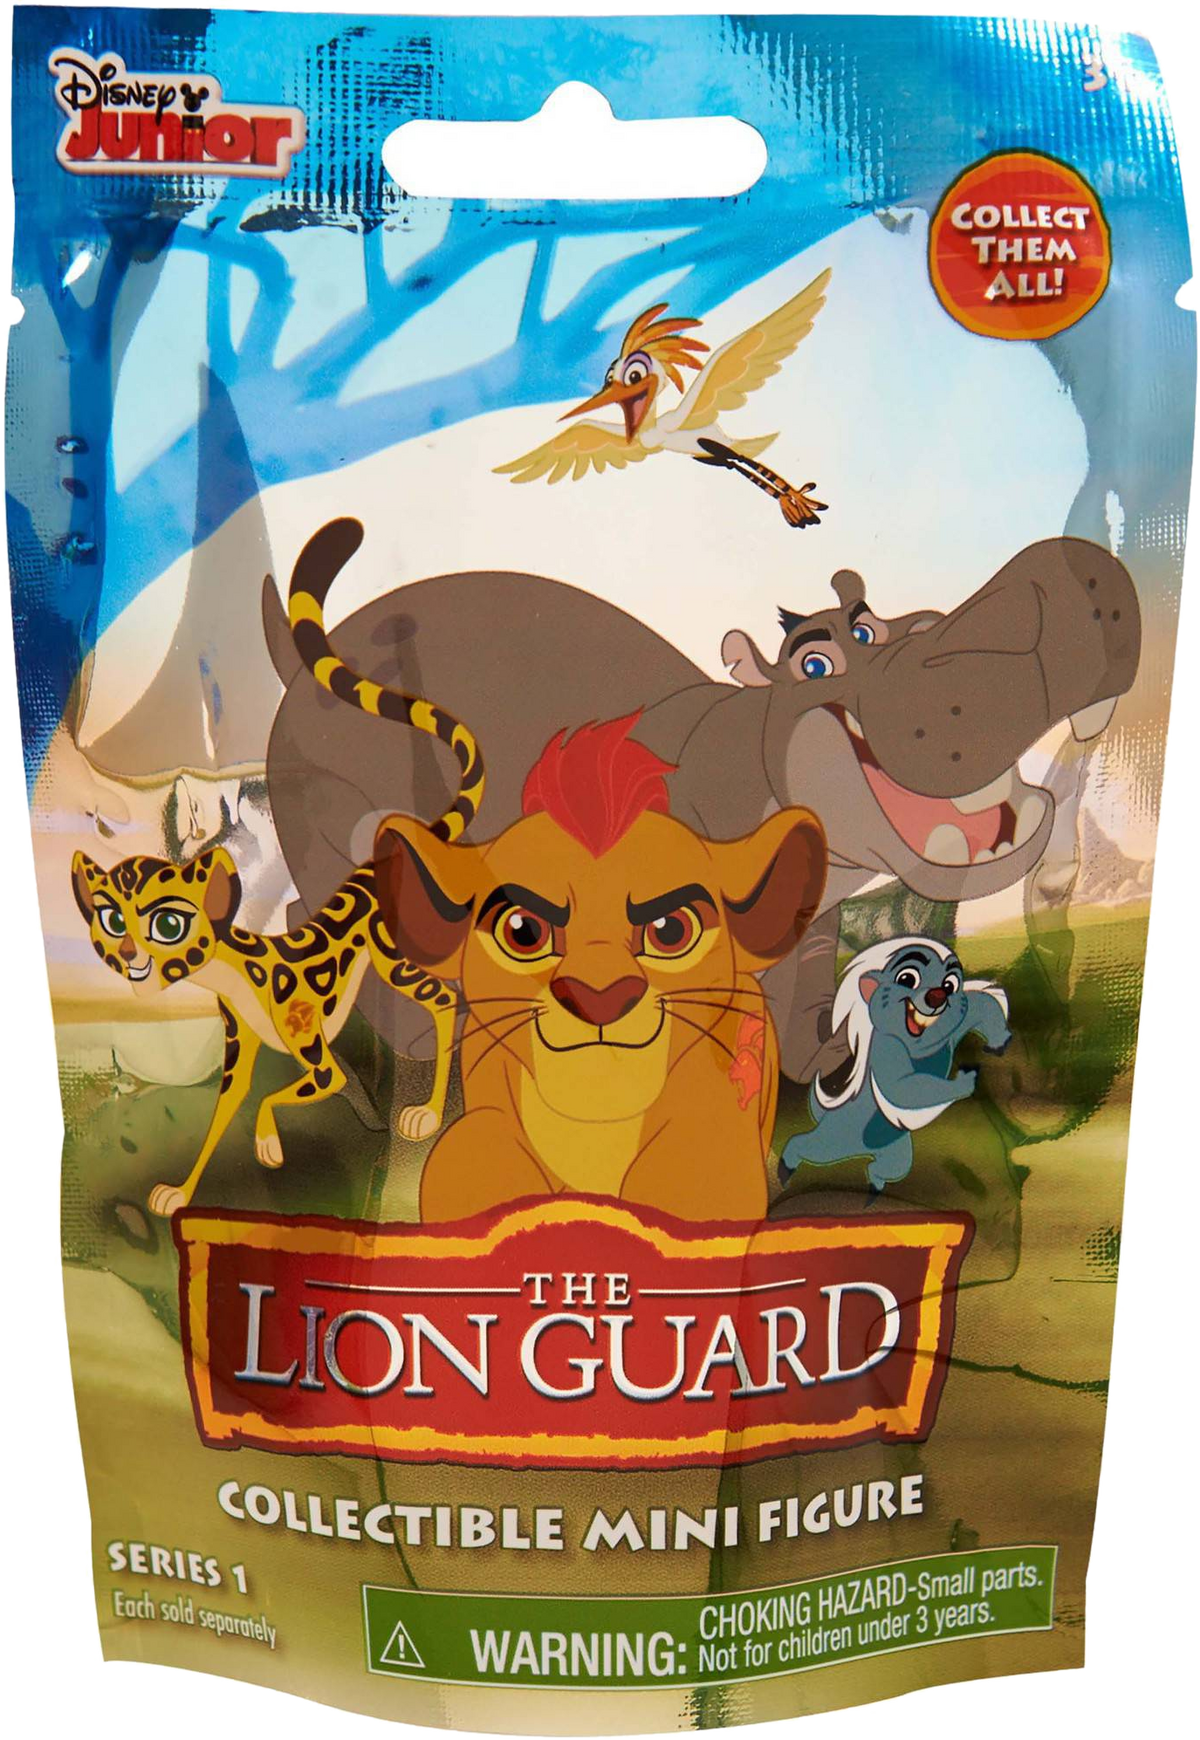 https://static.wikia.nocookie.net/lionguard/images/d/de/Blind-bag.png/revision/latest/scale-to-width-down/1200?cb=20160612163934